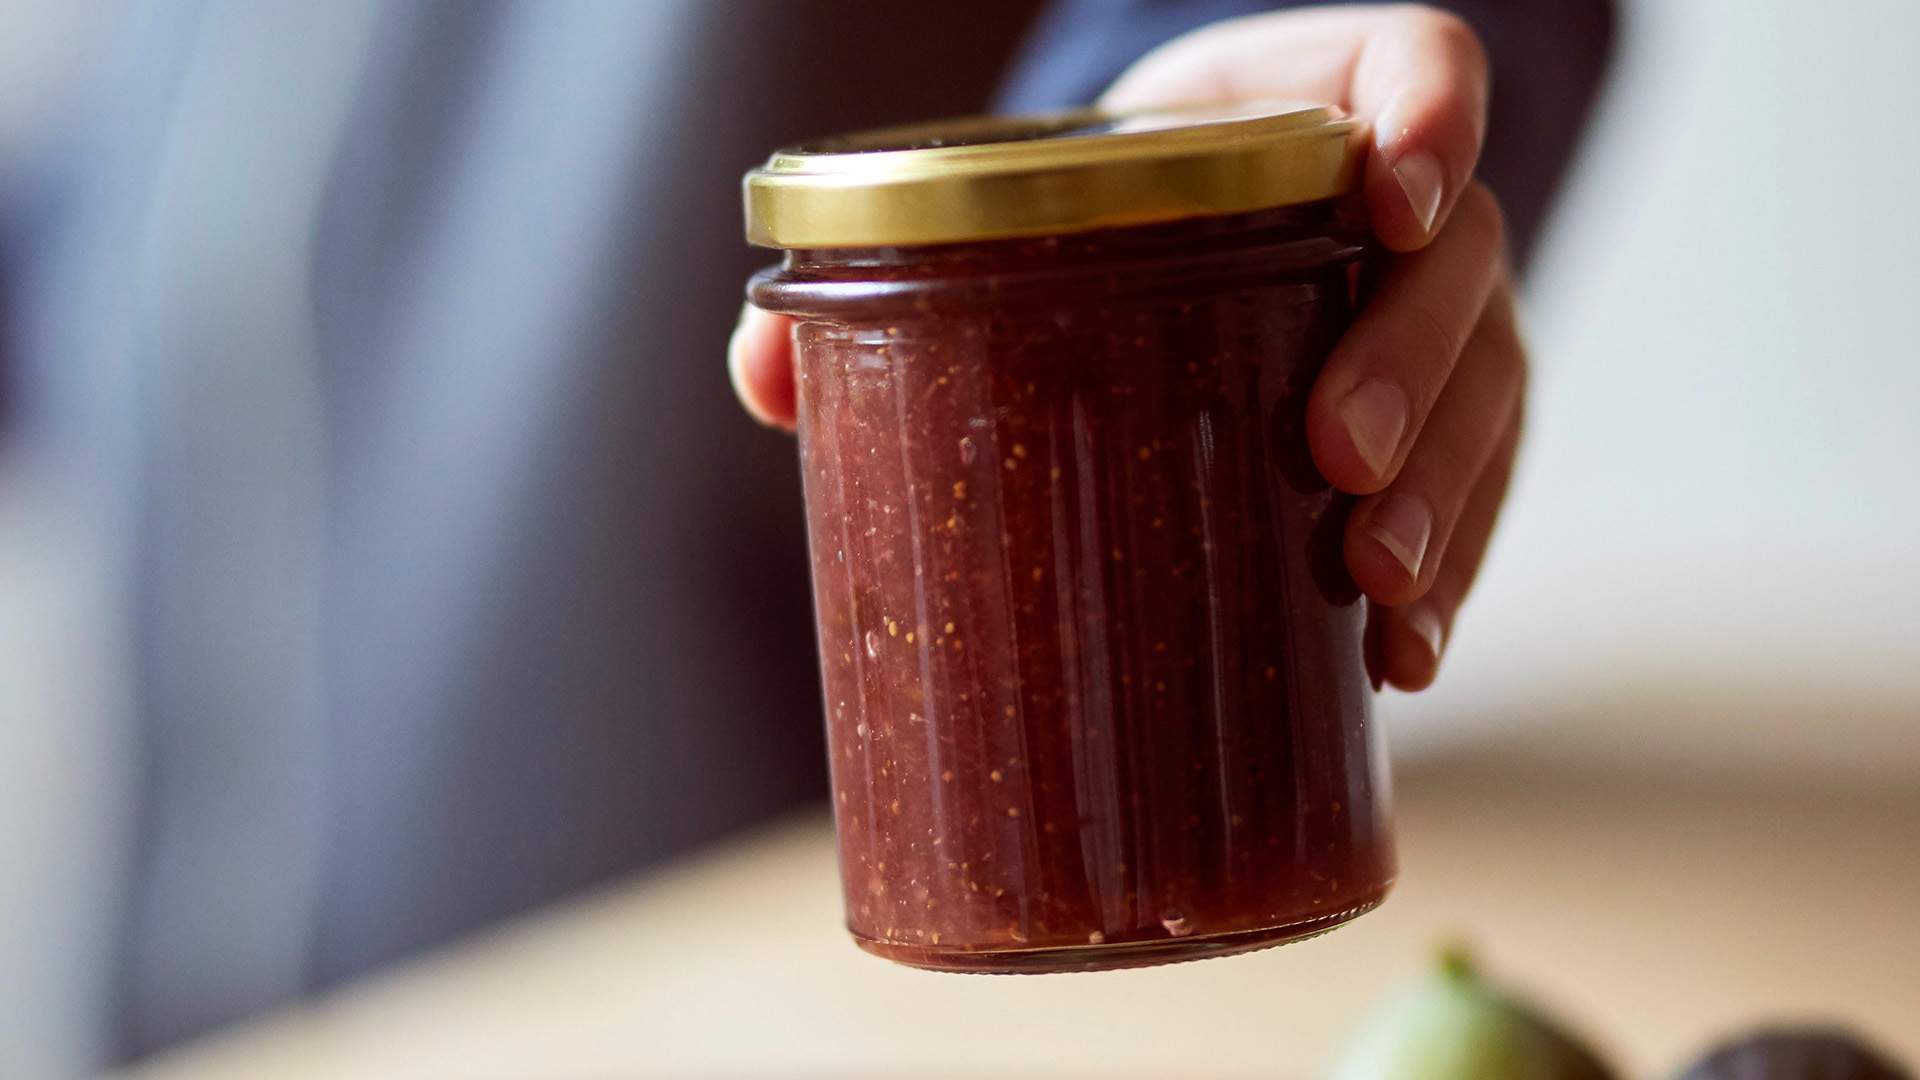 Condimental Is Australia's New Curated Delivery Service for Pickles, Preserves and Sauces